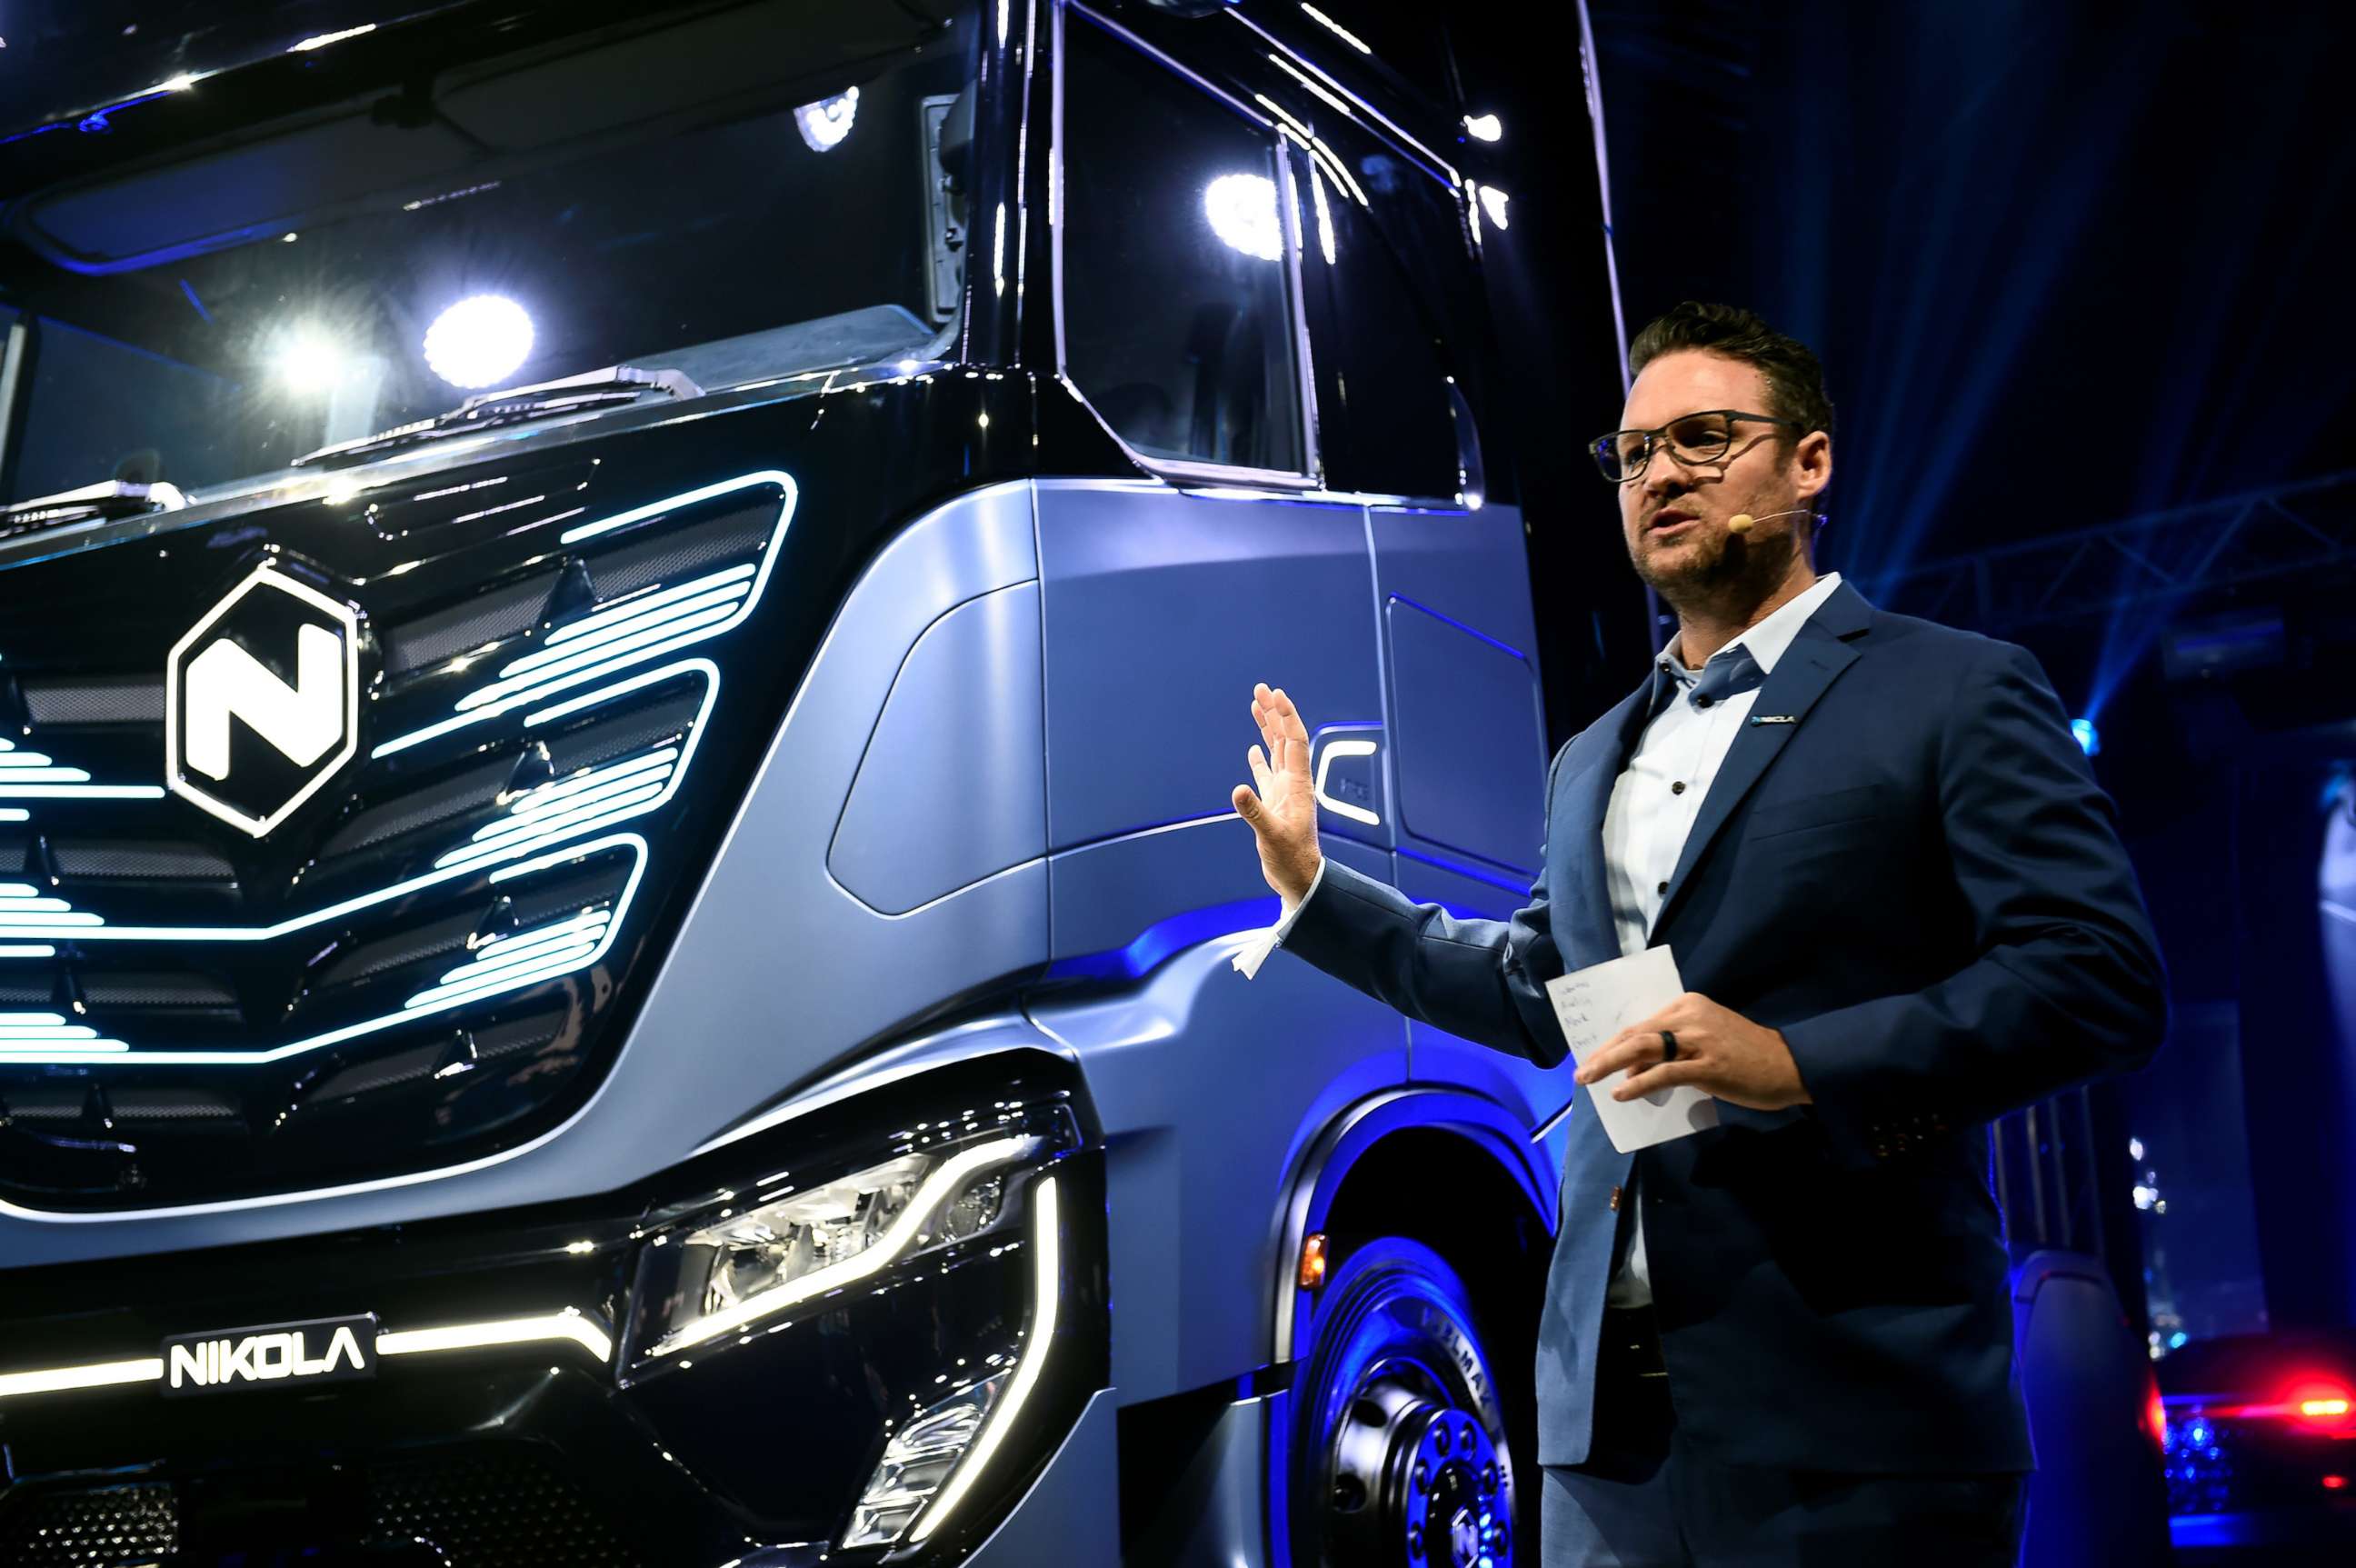 PHOTO: CEO and founder of Nikola Corp. Trevor Milton speaks during a presentation of its new full-electric and hydrogen fuel-cell battery trucks in partnership with CNH Industrial, at an event in Turin, Italy, Dec. 2, 2019.